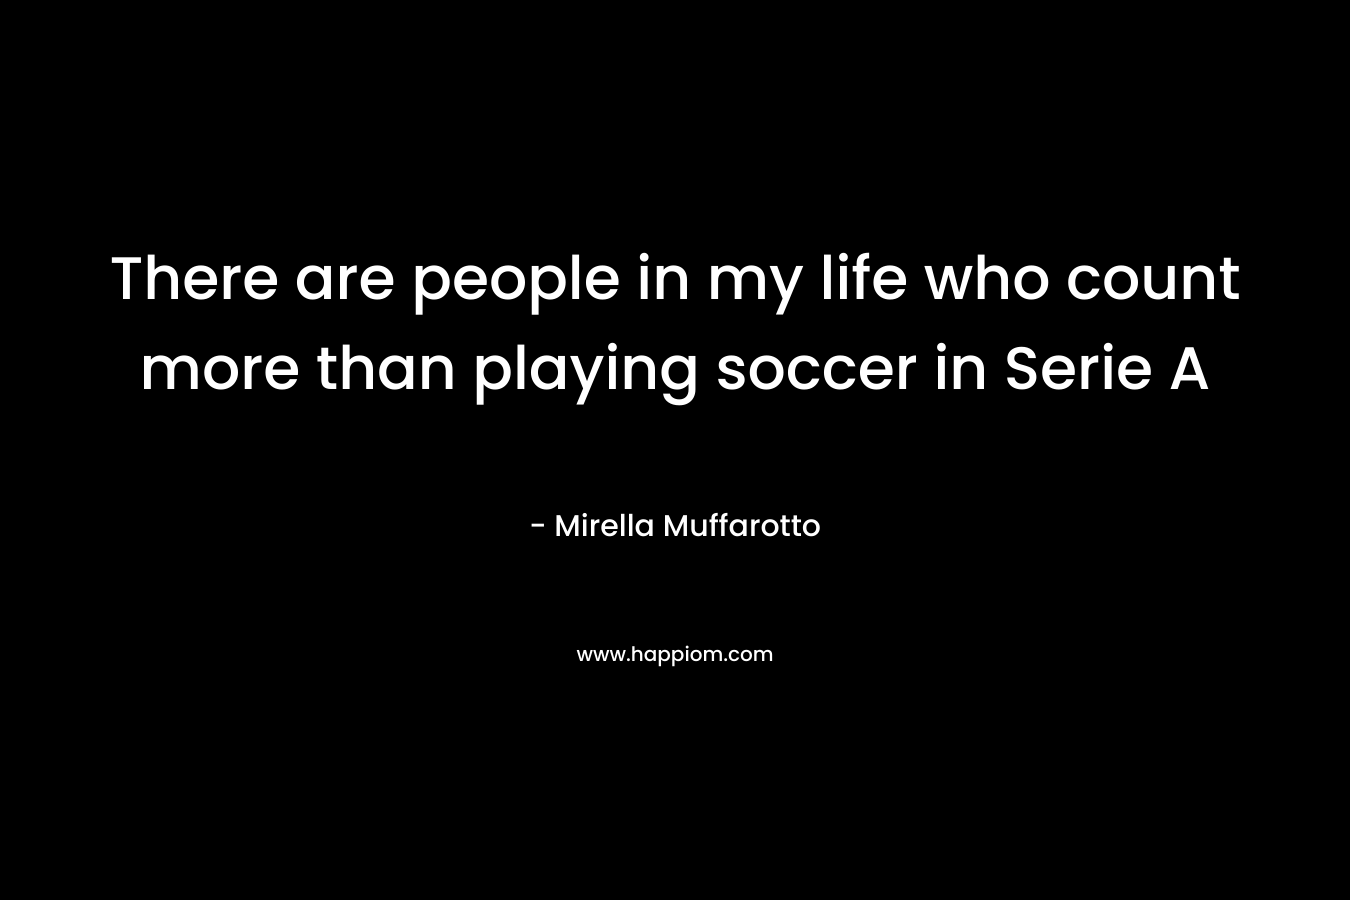 There are people in my life who count more than playing soccer in Serie A – Mirella Muffarotto